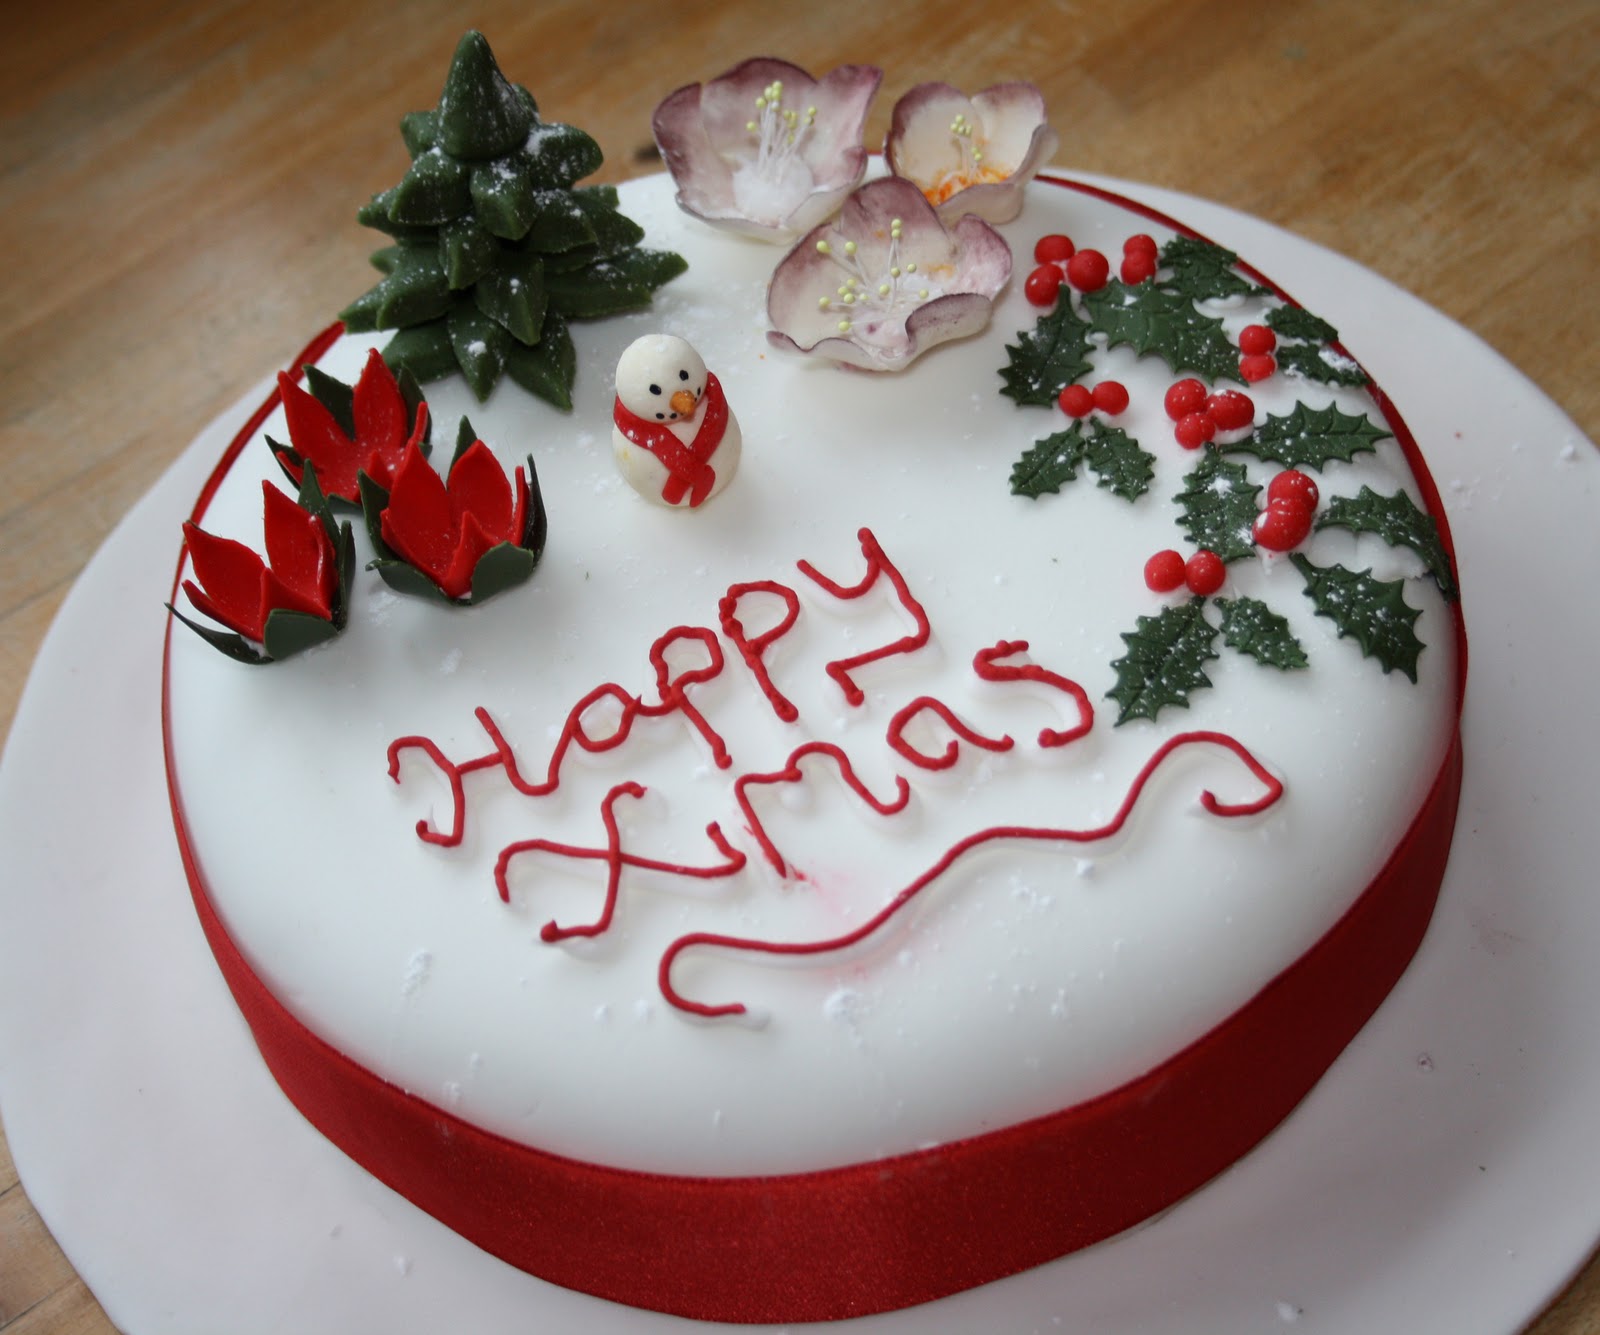 Decorating the Christmas Cake | Bex in Sugarland